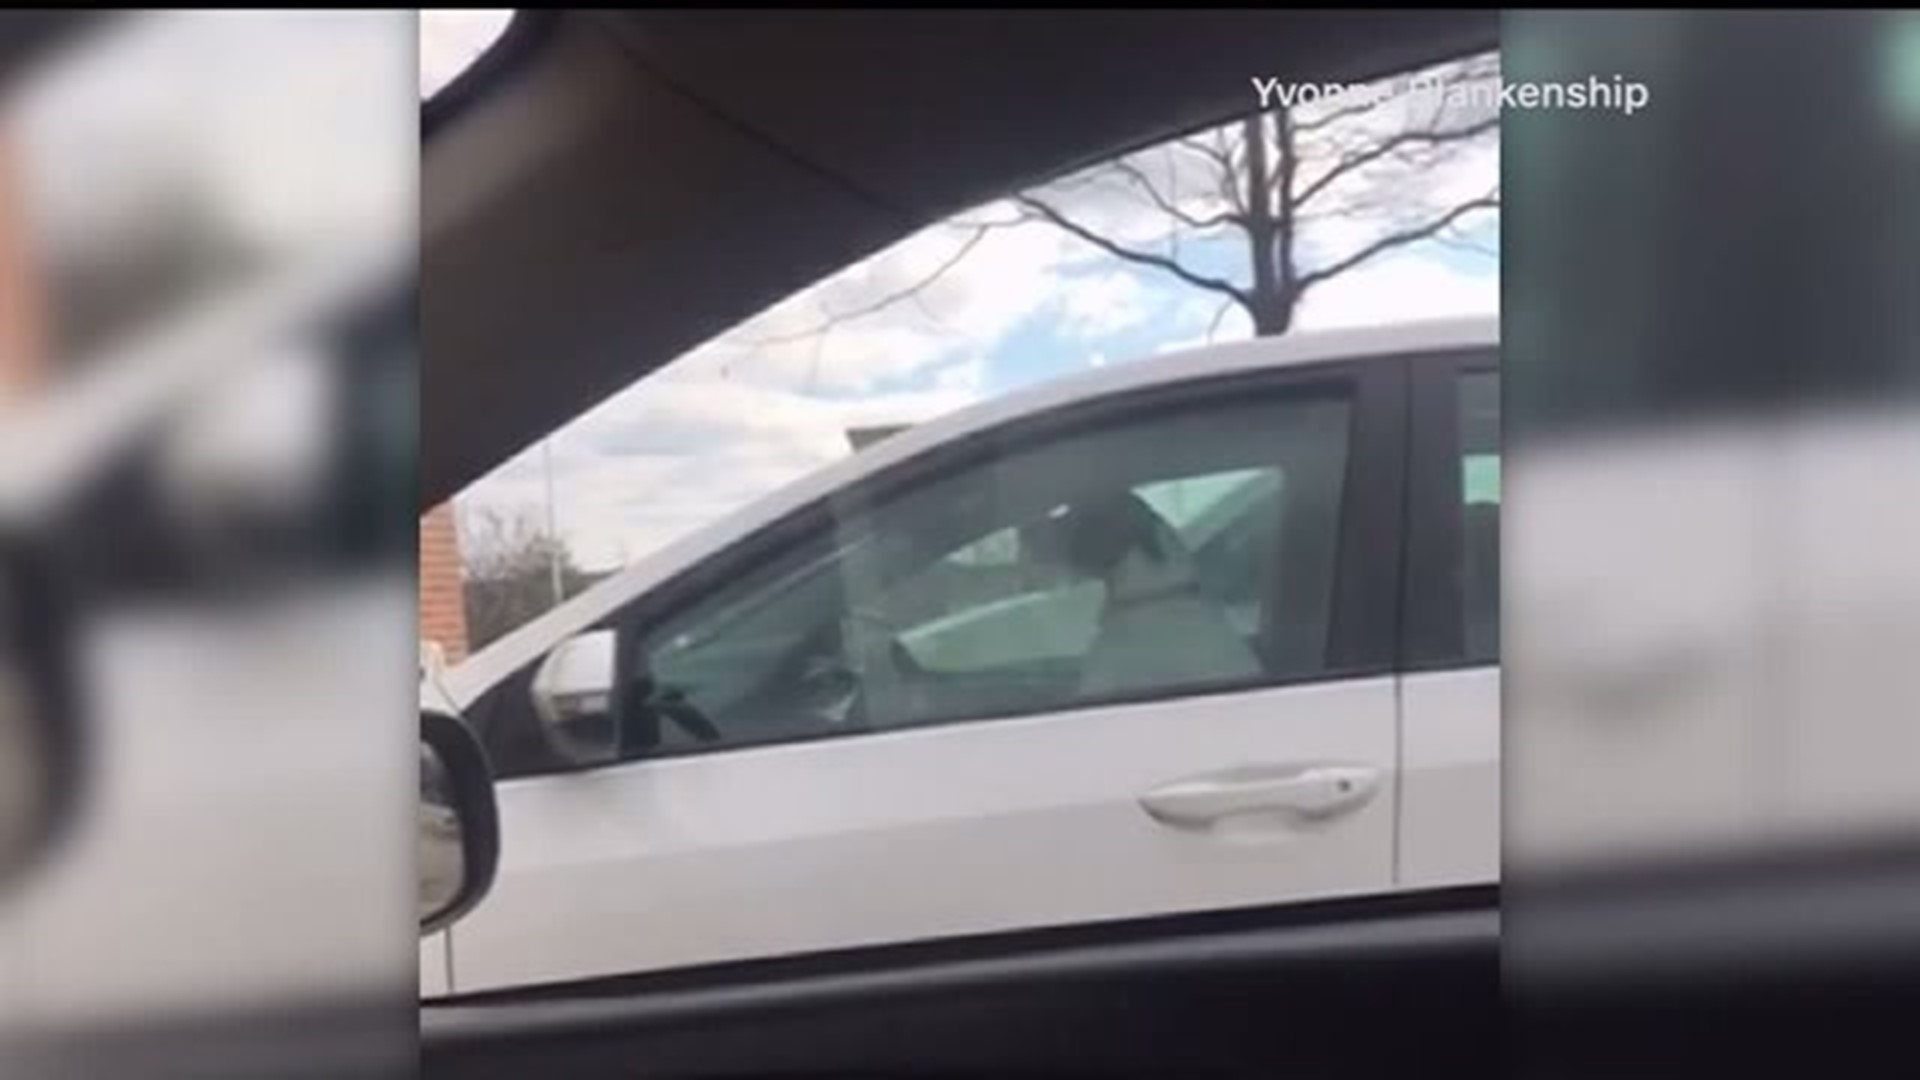 Impatient dog lays on the car horn